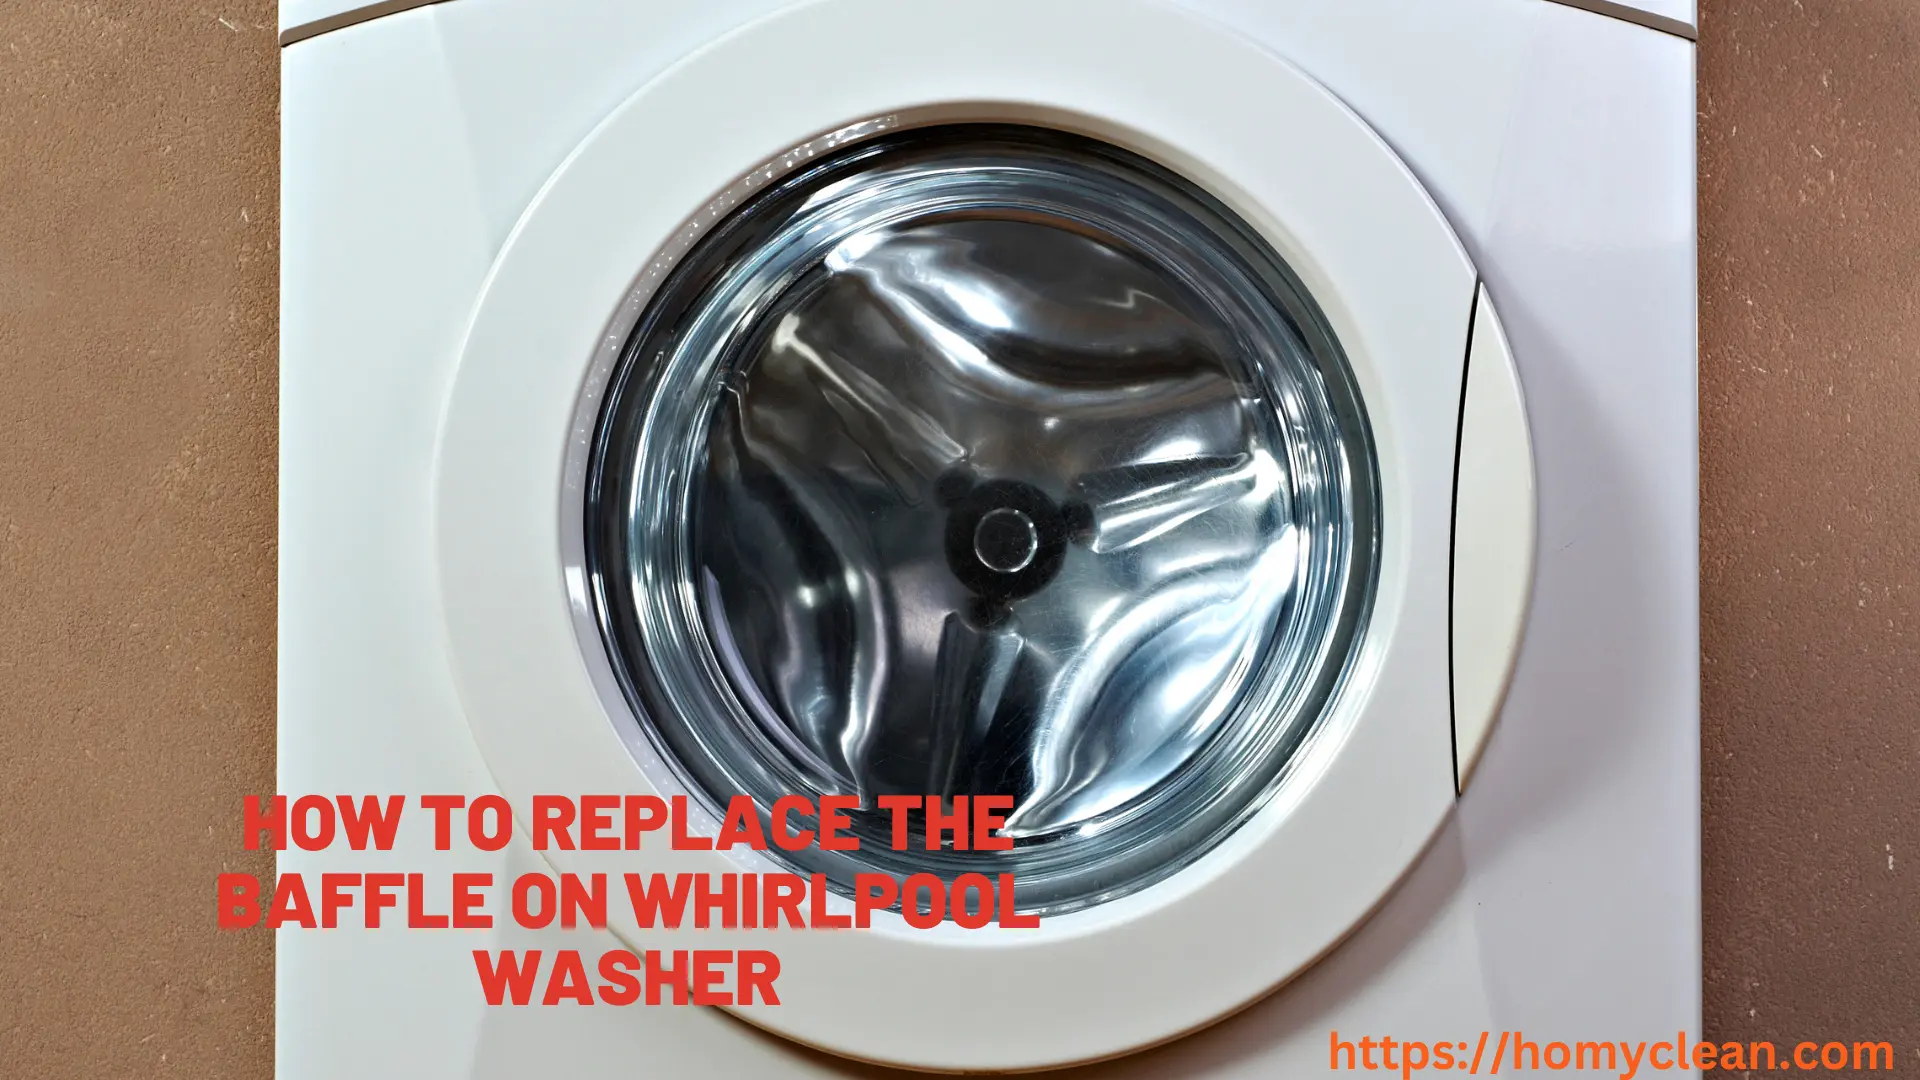 How to Replace the Baffle on Whirlpool Washer